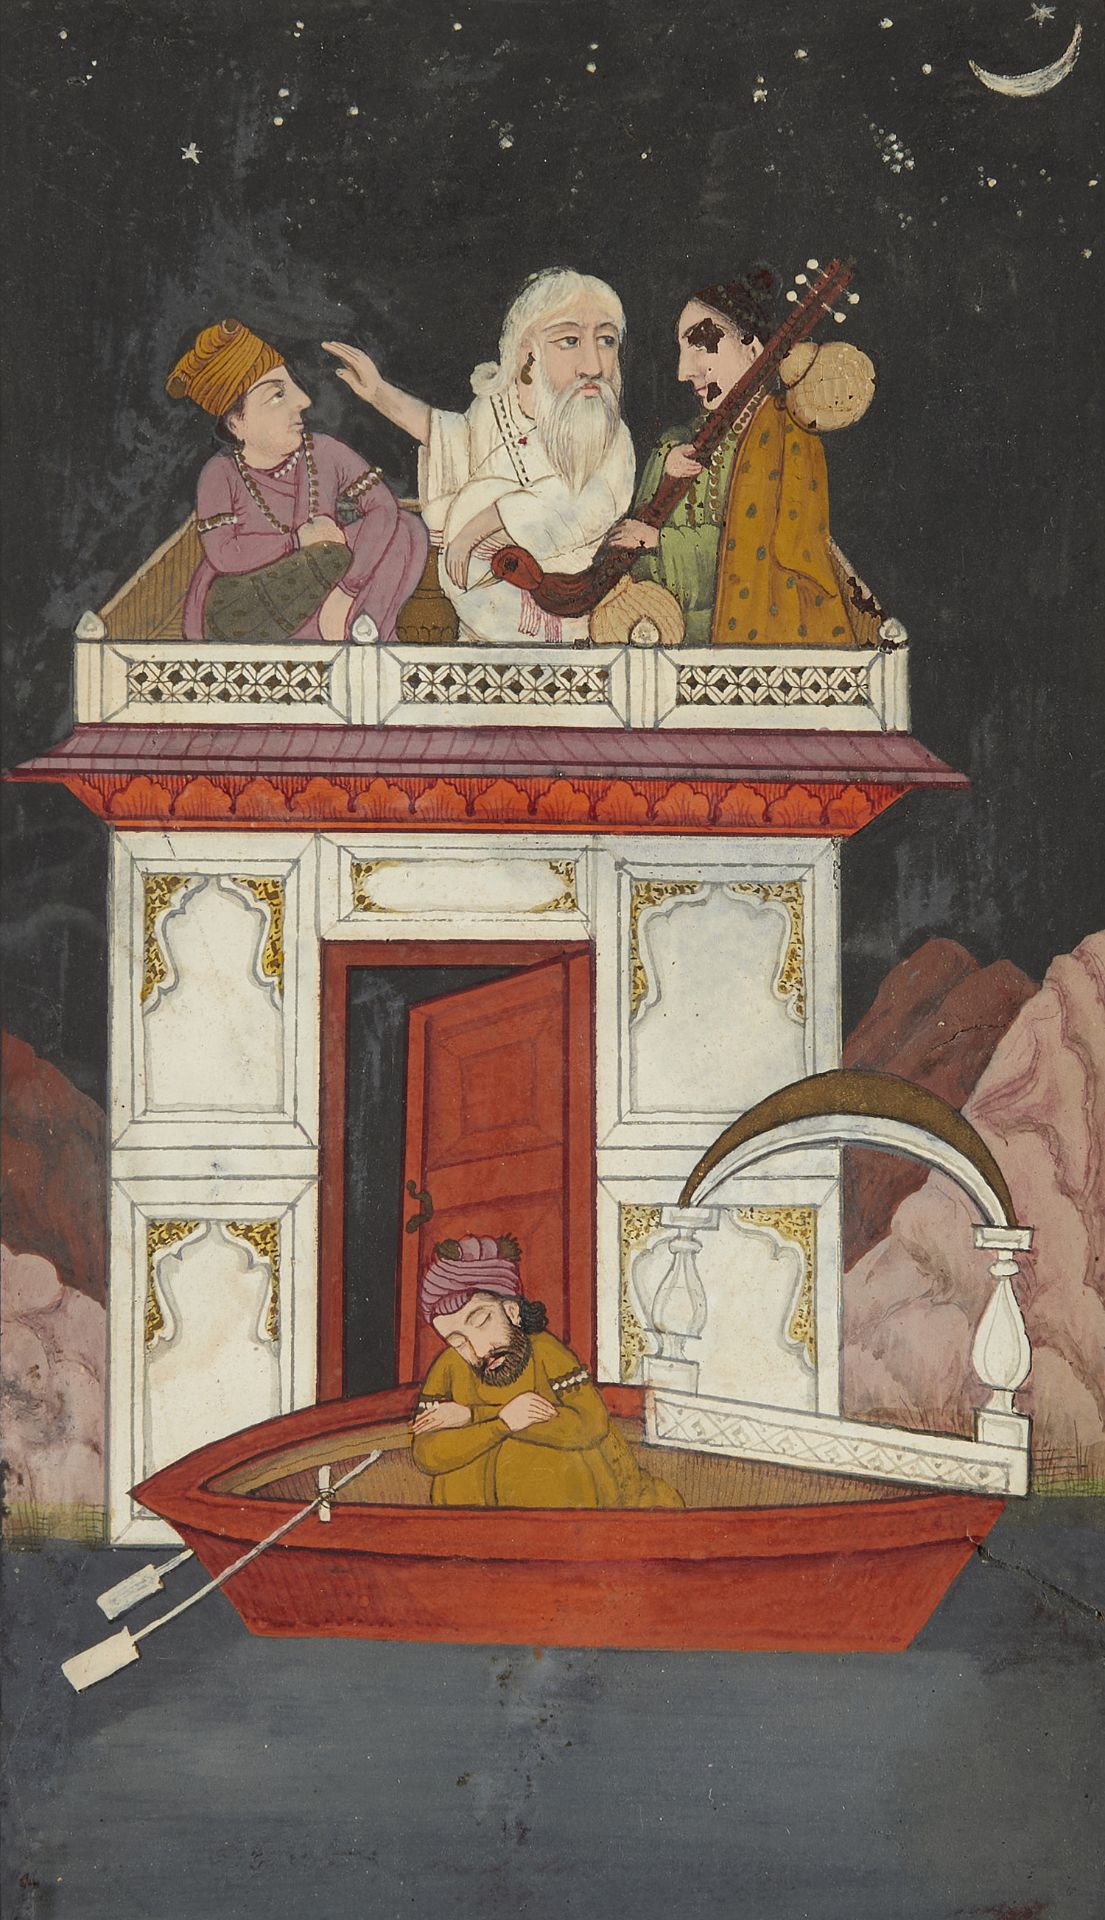 Likely Indian Manuscript Style Painting